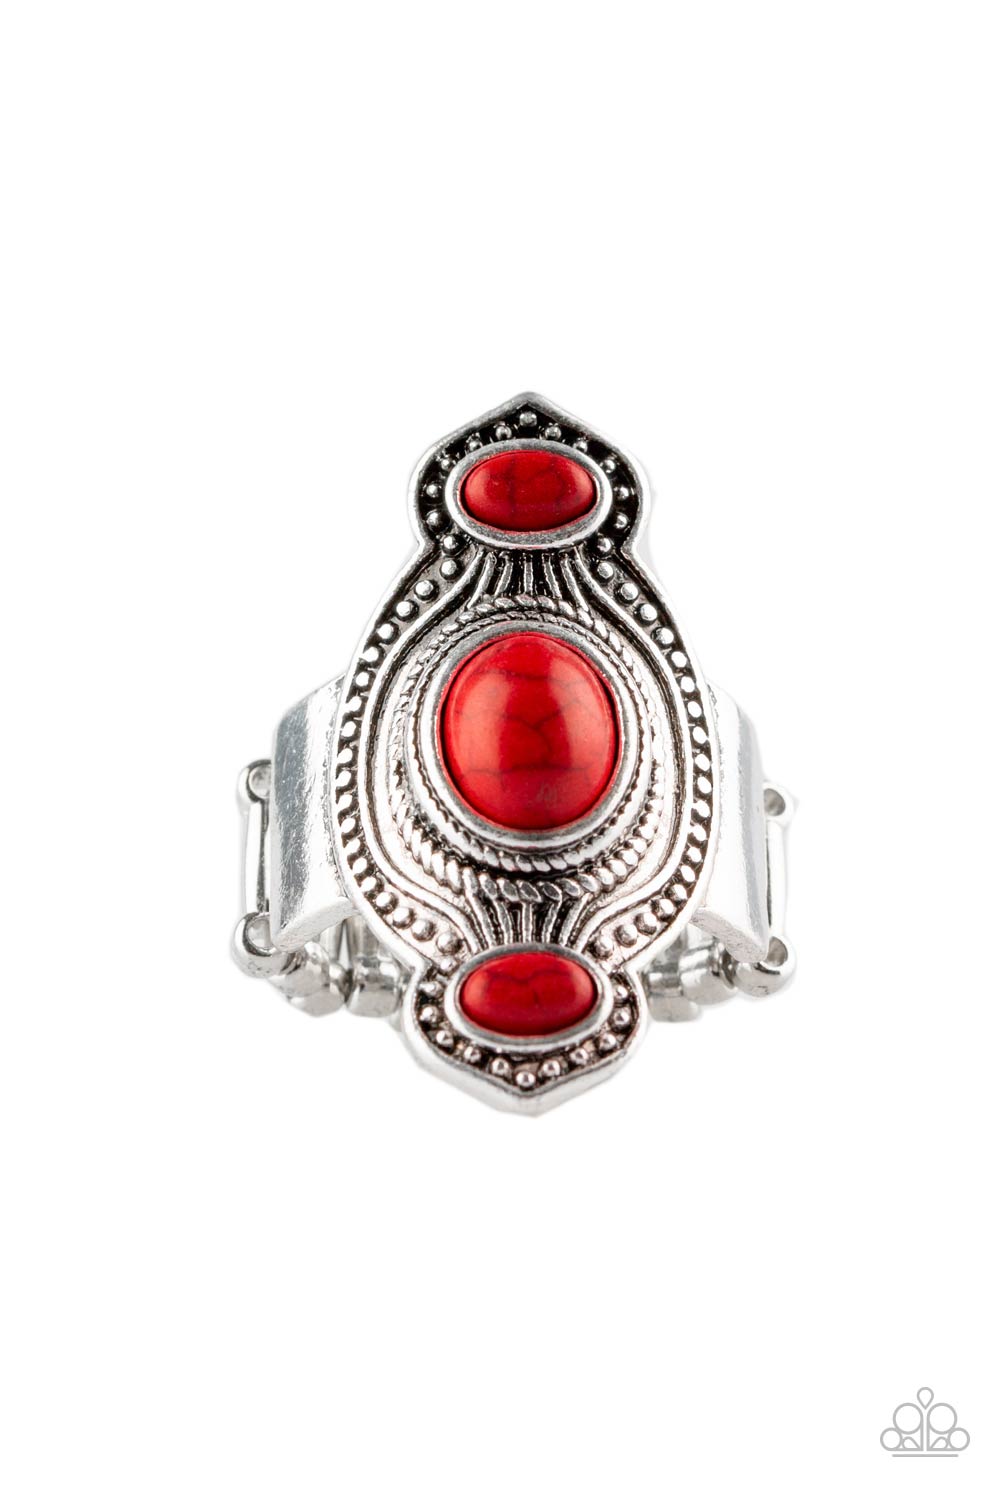 Dune Drifter Red Stone and Silver Ring - Paparazzi Accessories- lightbox - CarasShop.com - $5 Jewelry by Cara Jewels